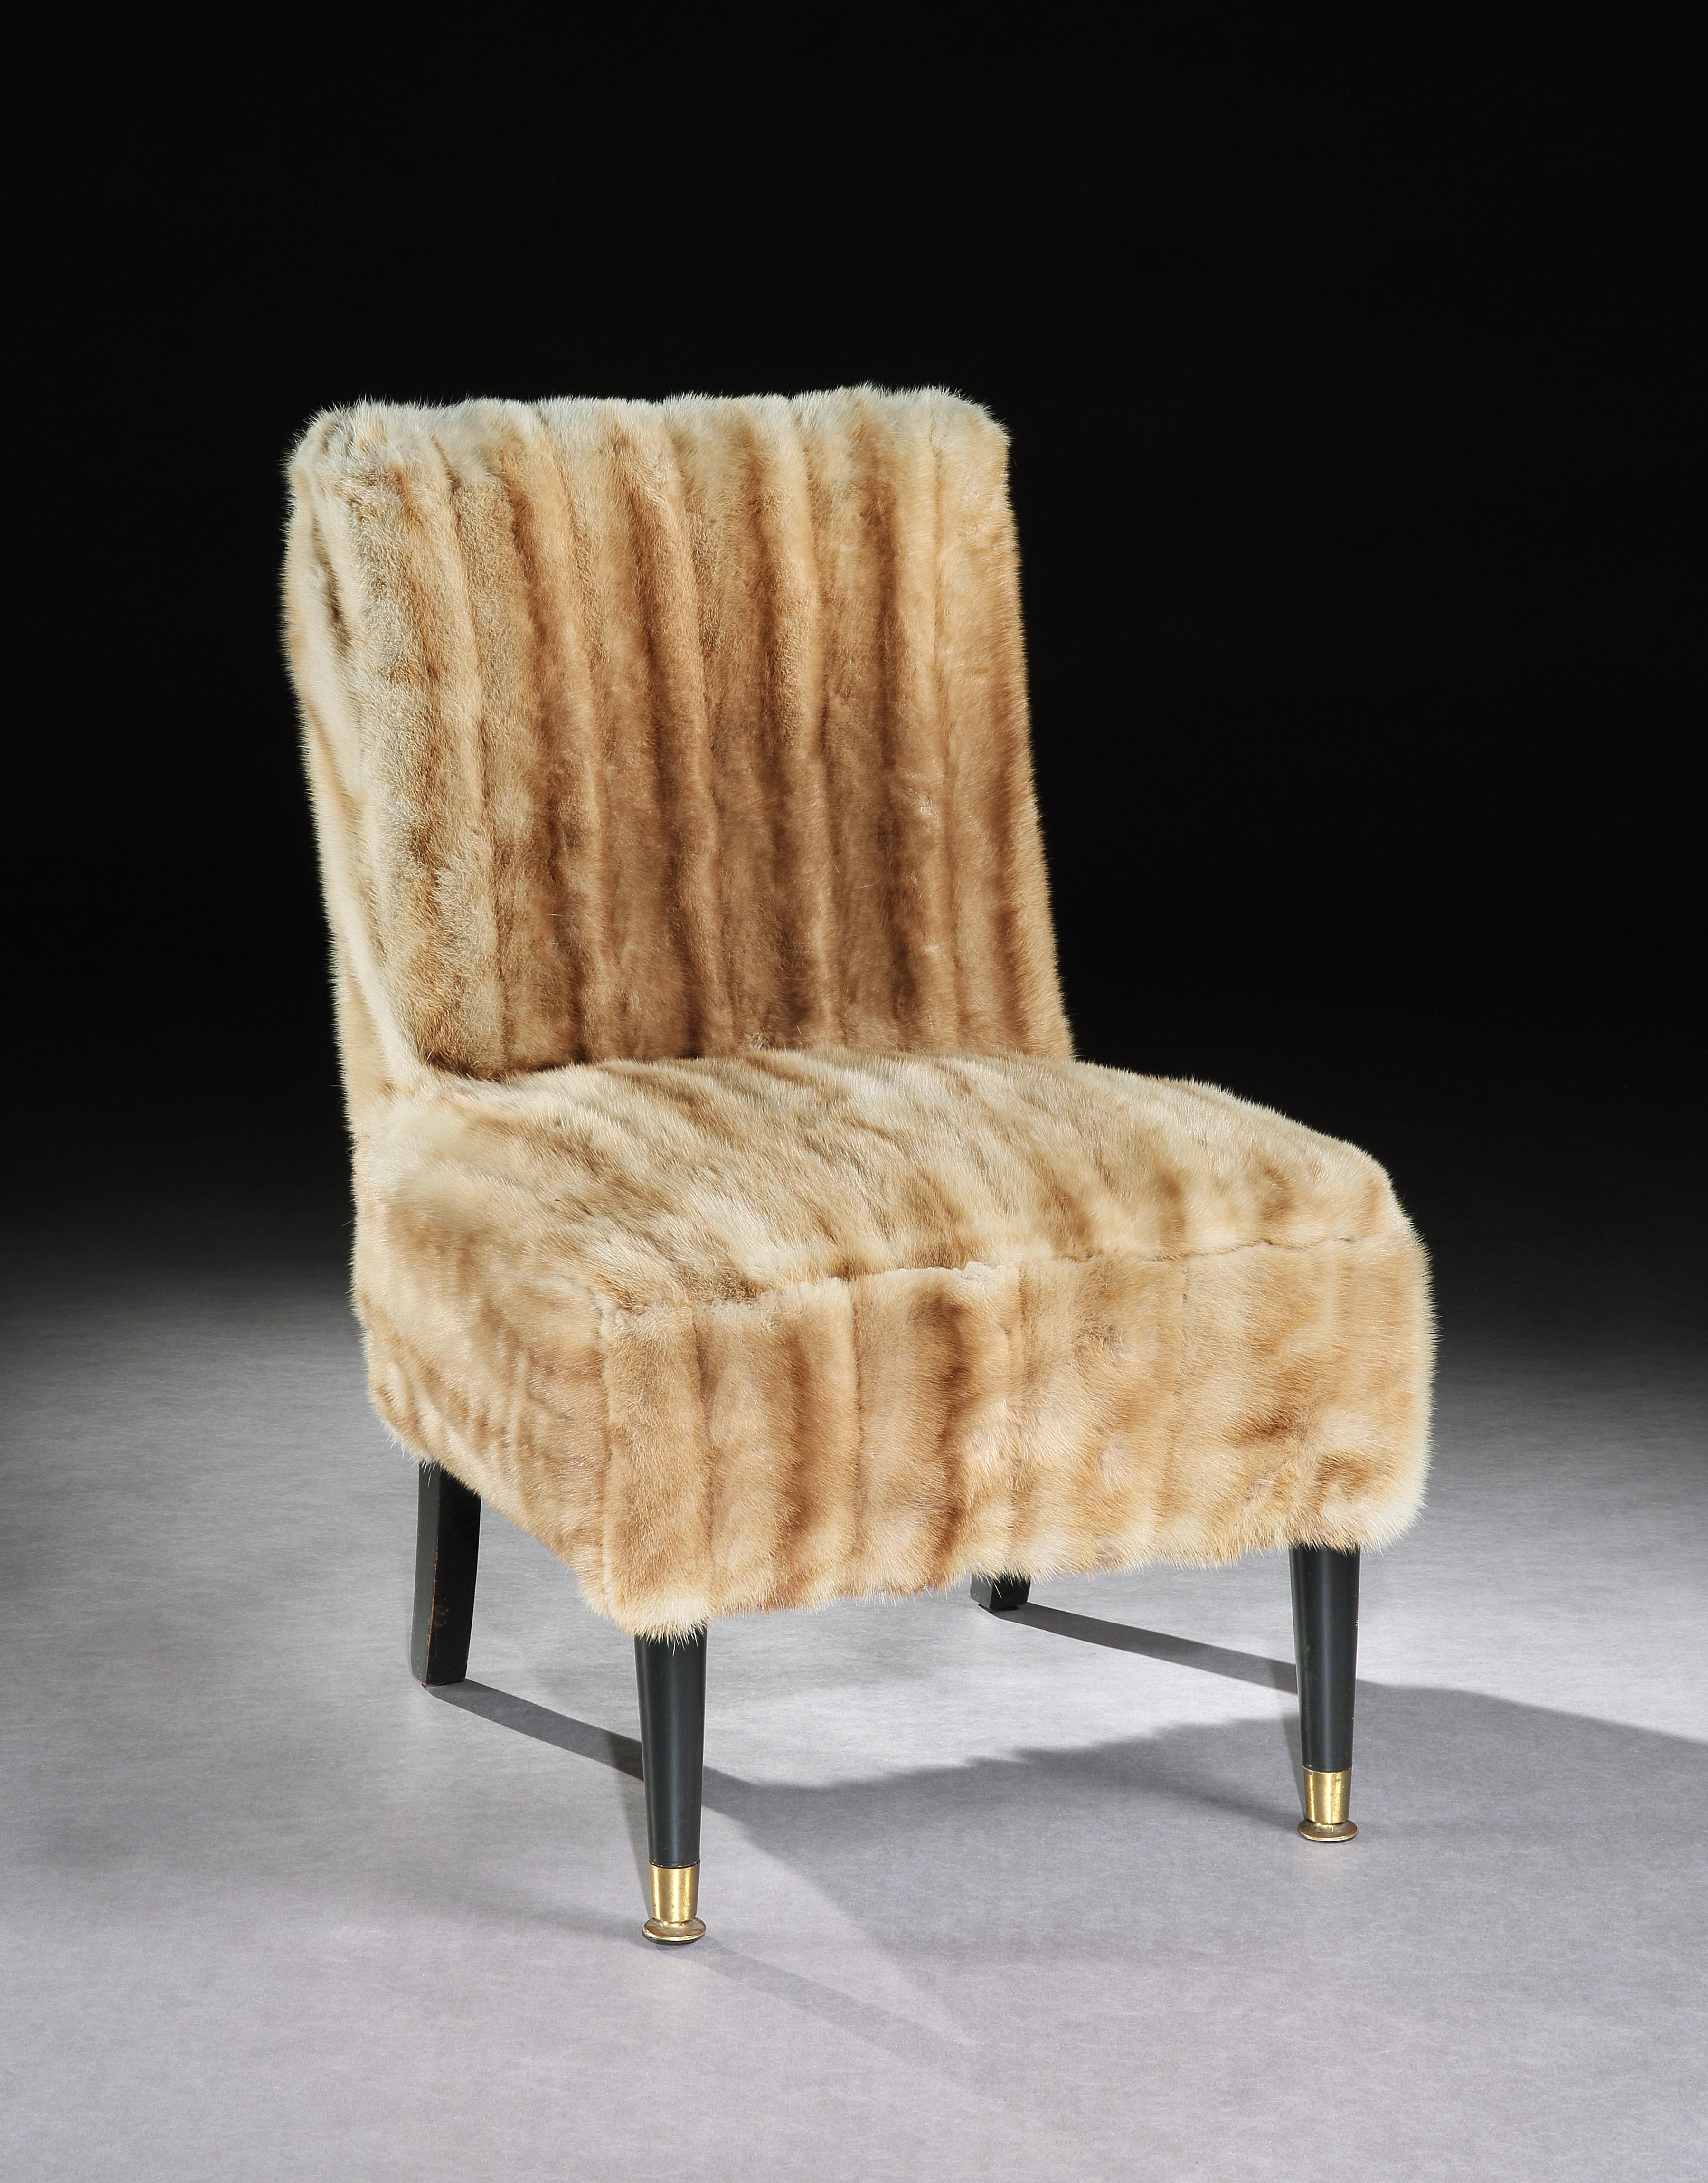 The back and seat fully upholstered in a fawn colored mink. Standing on turned ebonised front legs with brass cappings and tapering ebonised back legs.
 
Measures: Width 51 cm, 20 in.
Back height 78.50 cm, 31 in. Seat height 40.50 cm, 16